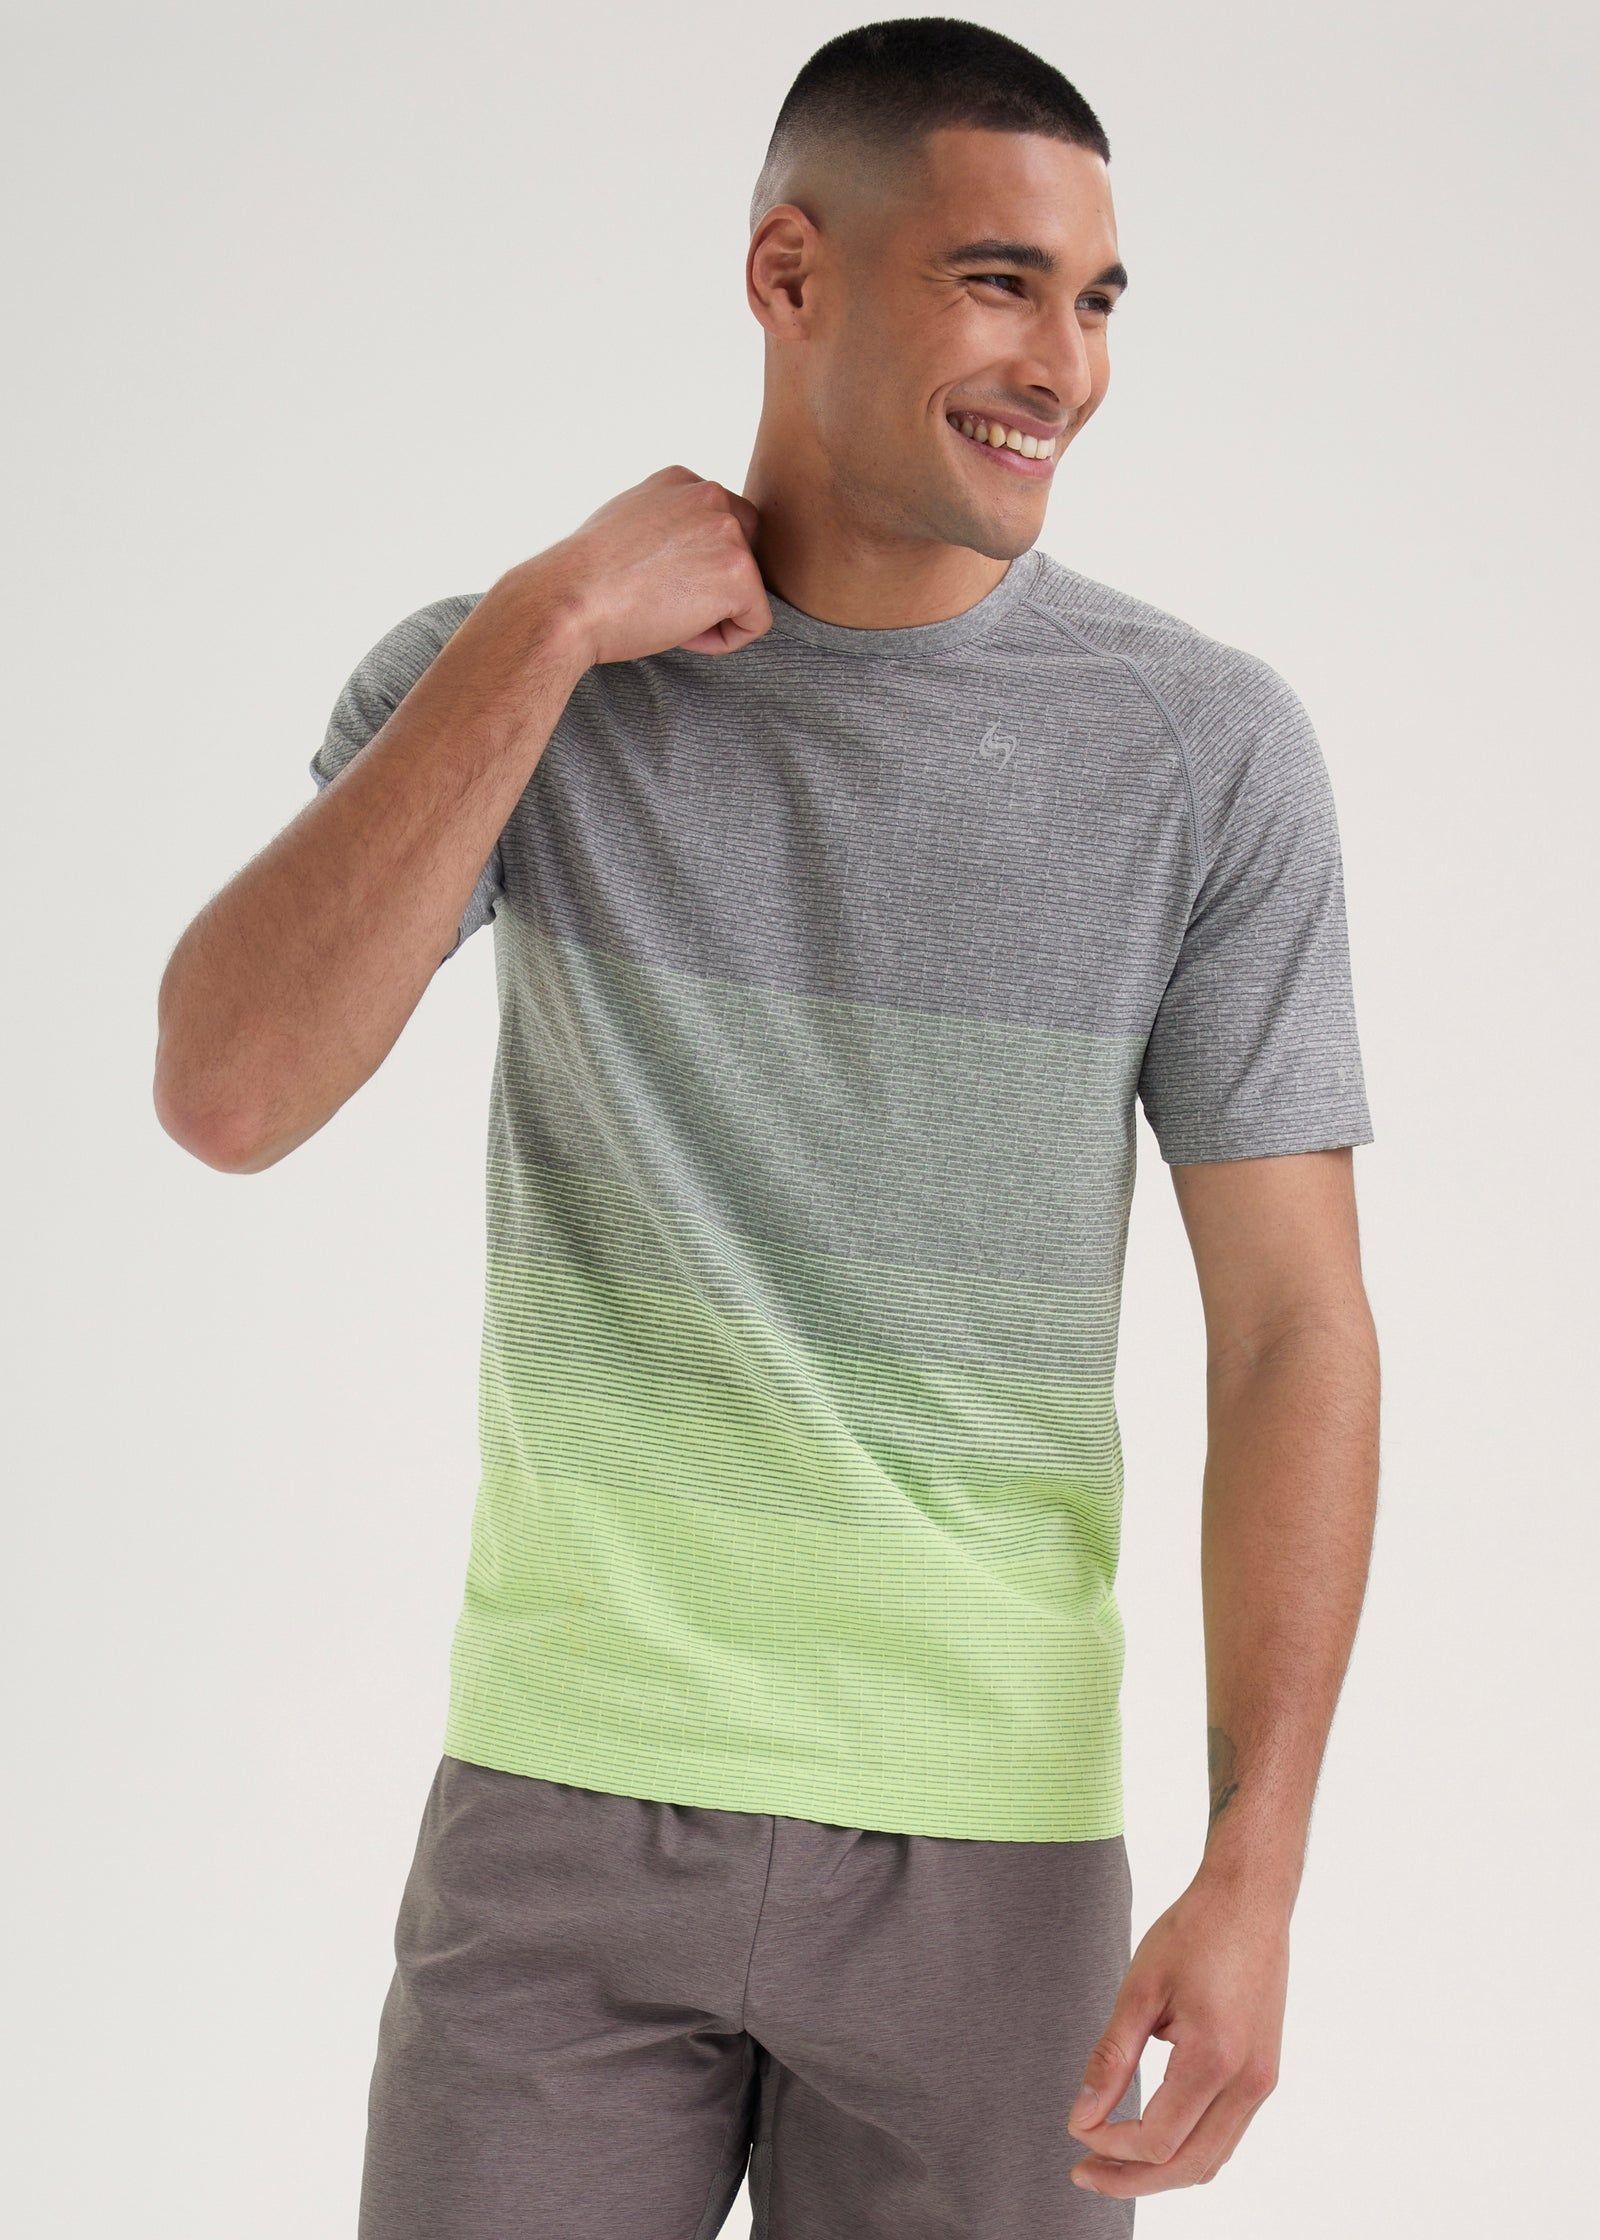 Souluxe Grey & Lime Ombre Sports T-Shirt - Multi - L